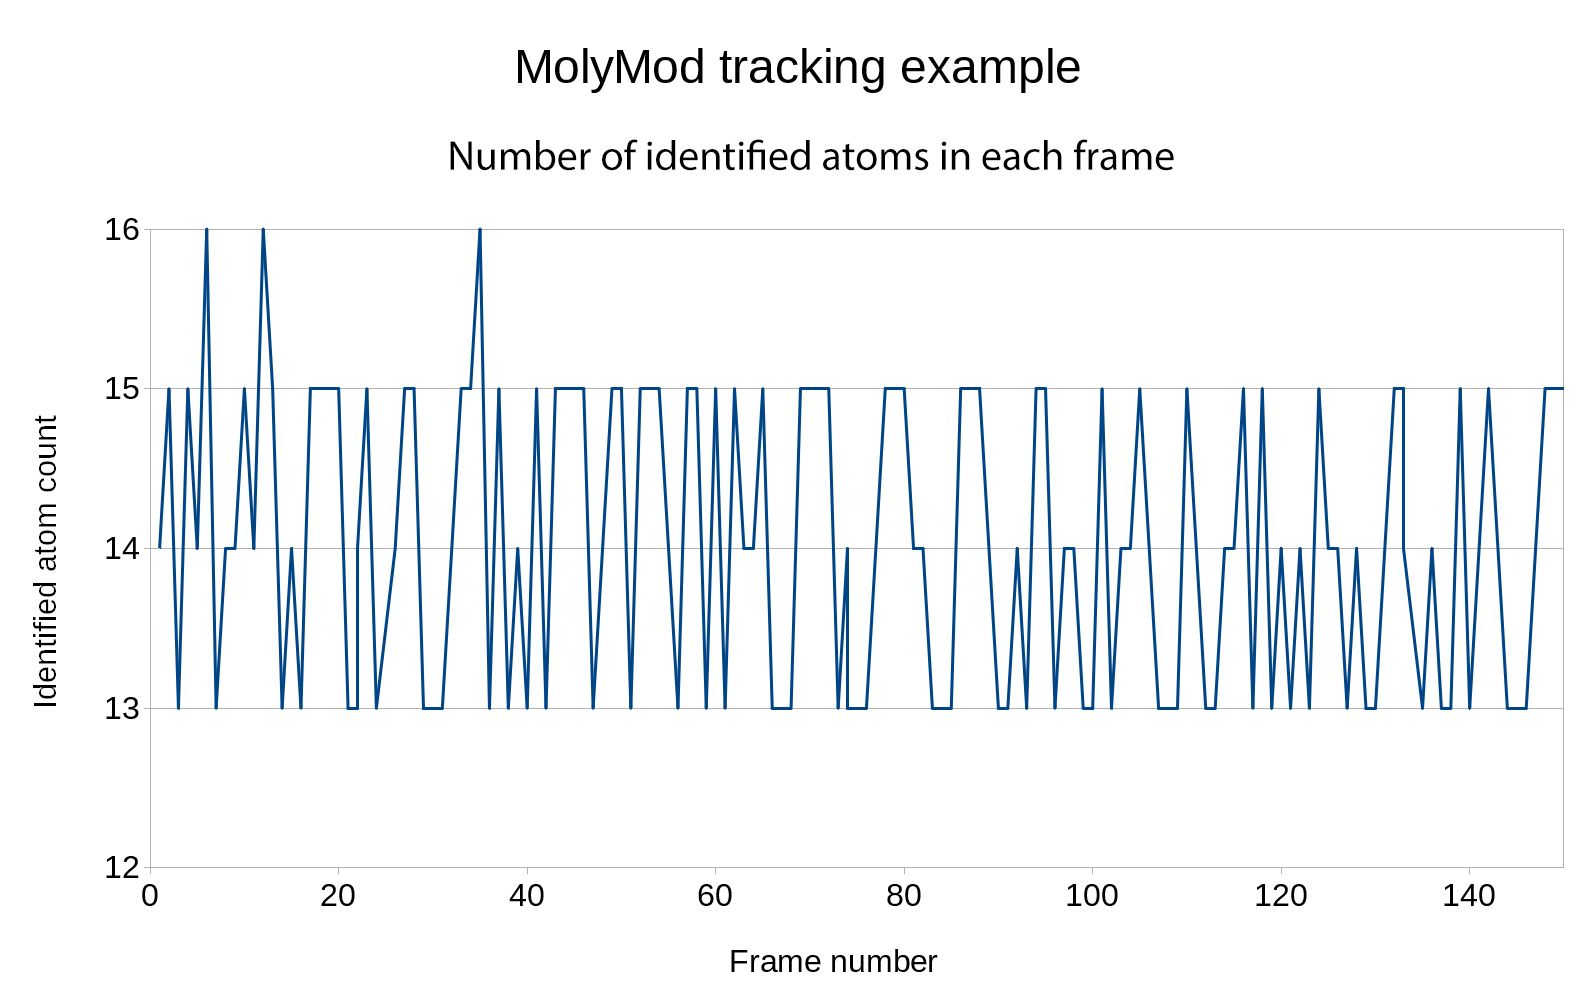 Figure 13: The number of tracked atoms in each frame of a video of a thymine (15 atoms) using the MolyMod physical model shows that it is robustly tracked using our image processing step, all atoms can be identified and few artifacts are present (more than 15 atoms).